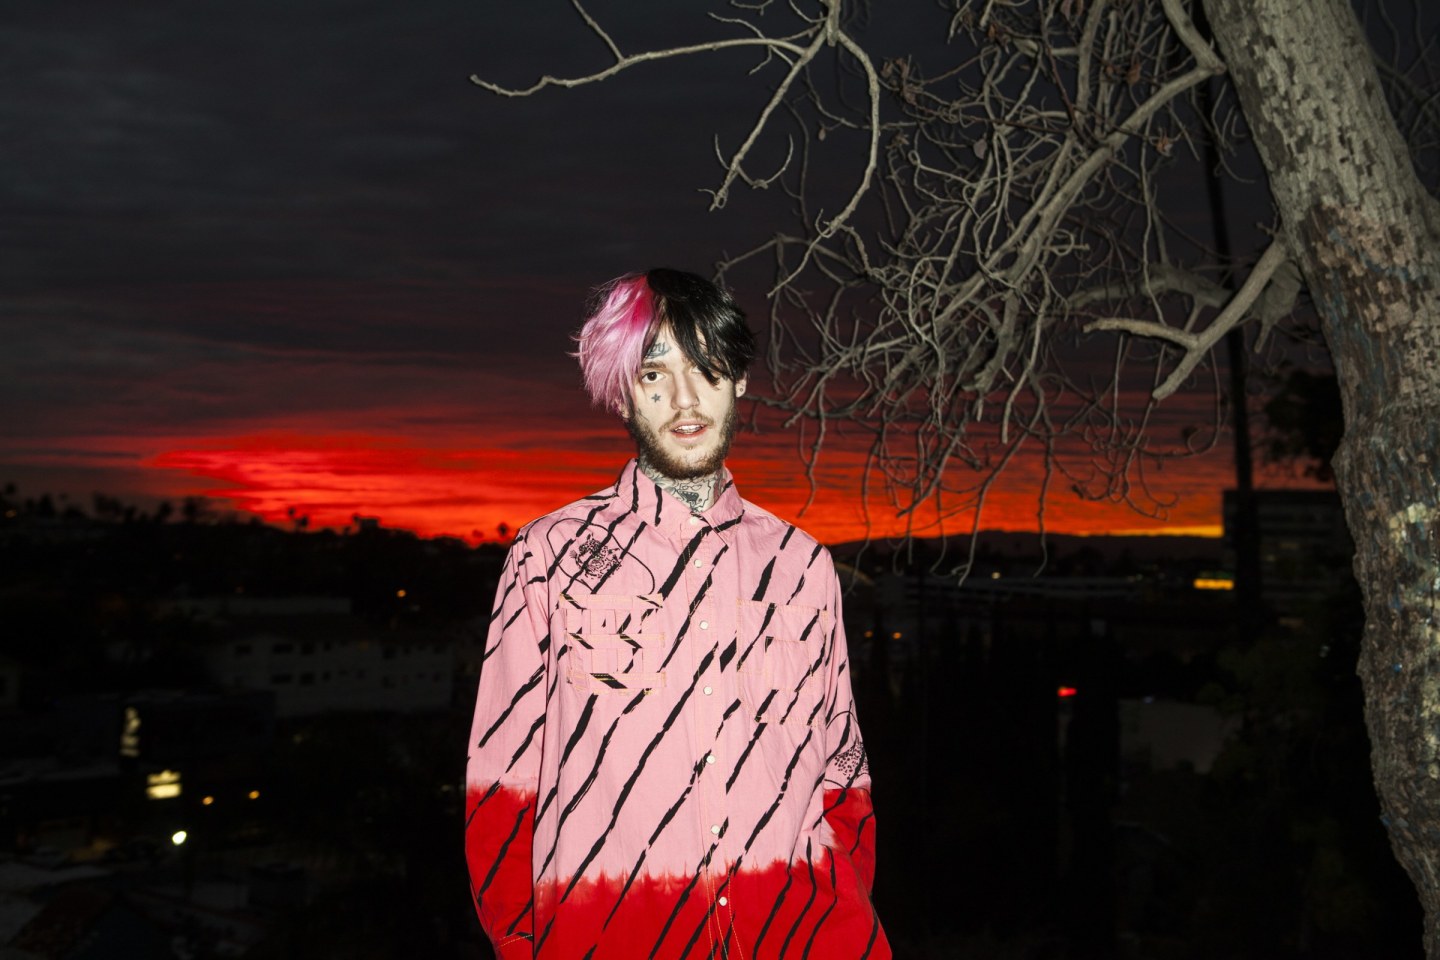 The Lil Peep doc <i>Everybody’s Everything</i> is an incomplete guide for misfits